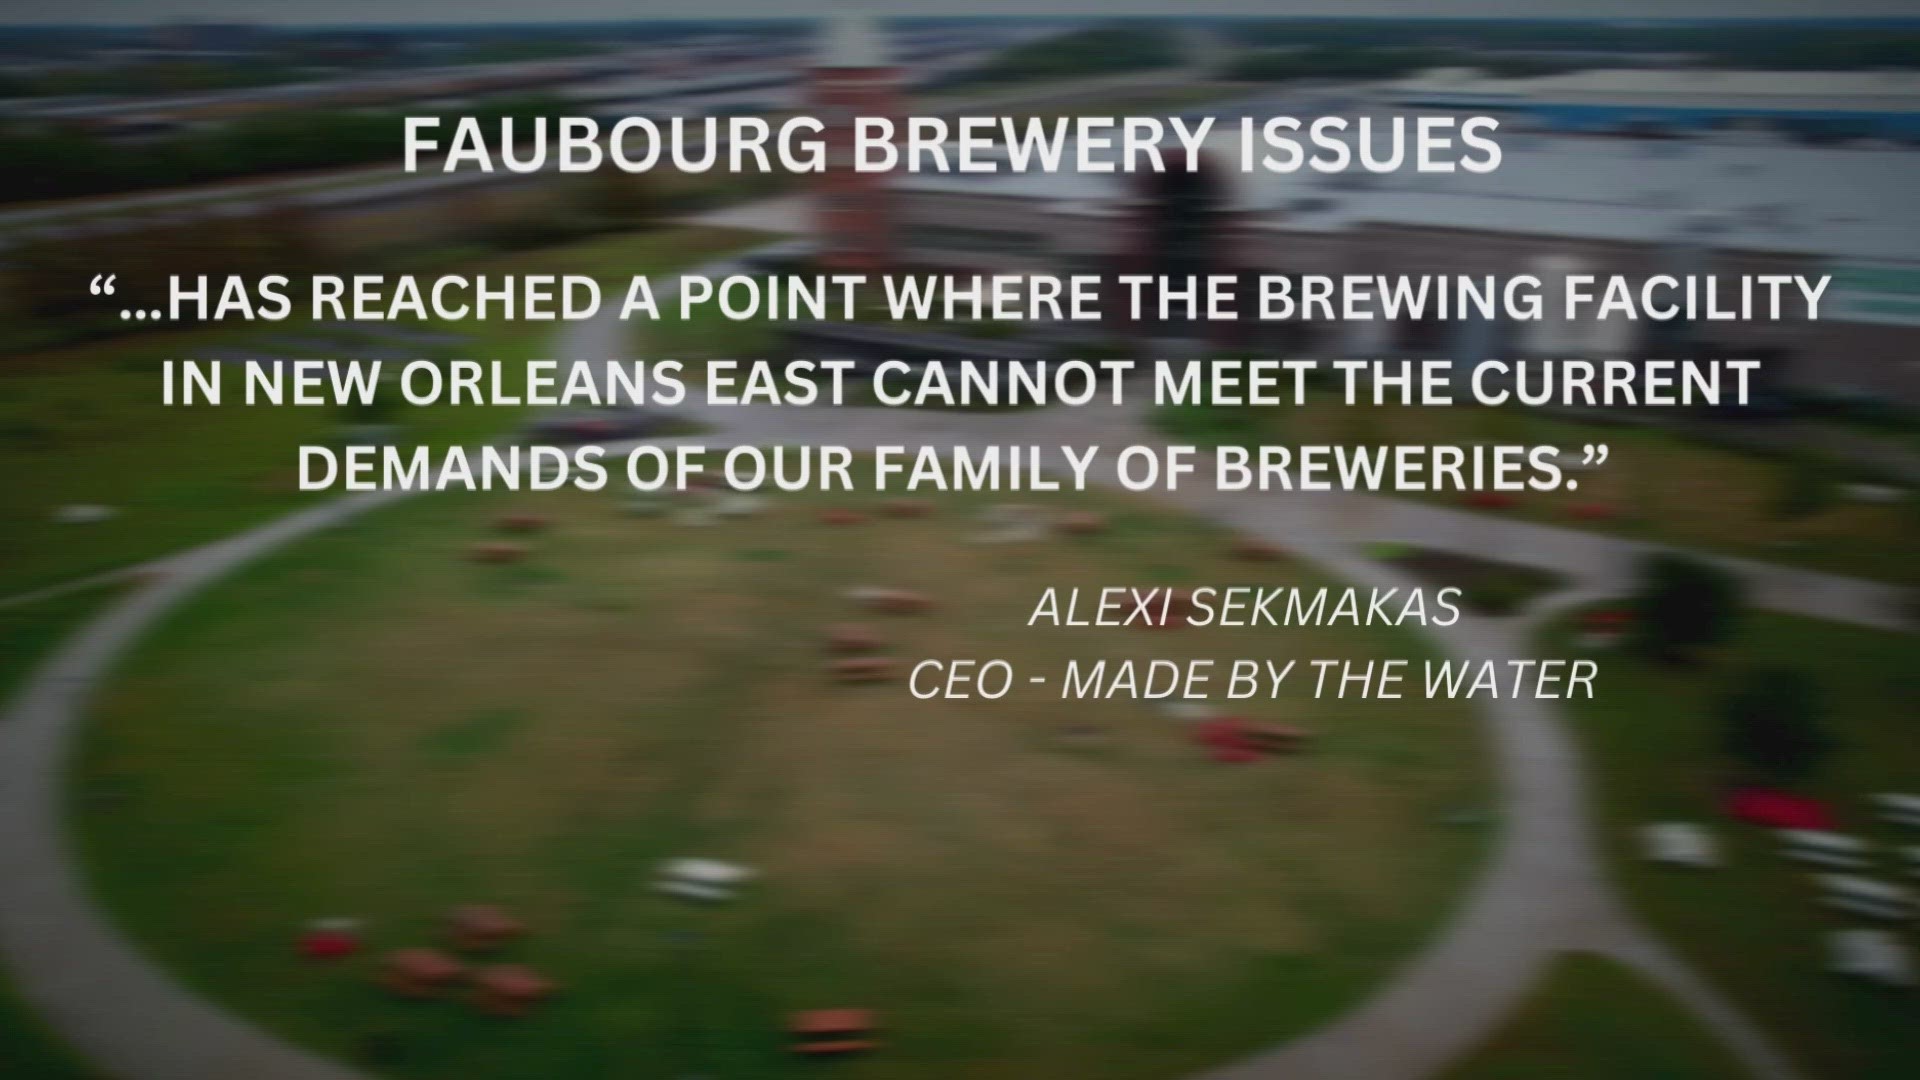 Faubourg Brewing Company is now expected to cease most of its beer-making operations at the Jourdan Road complex.